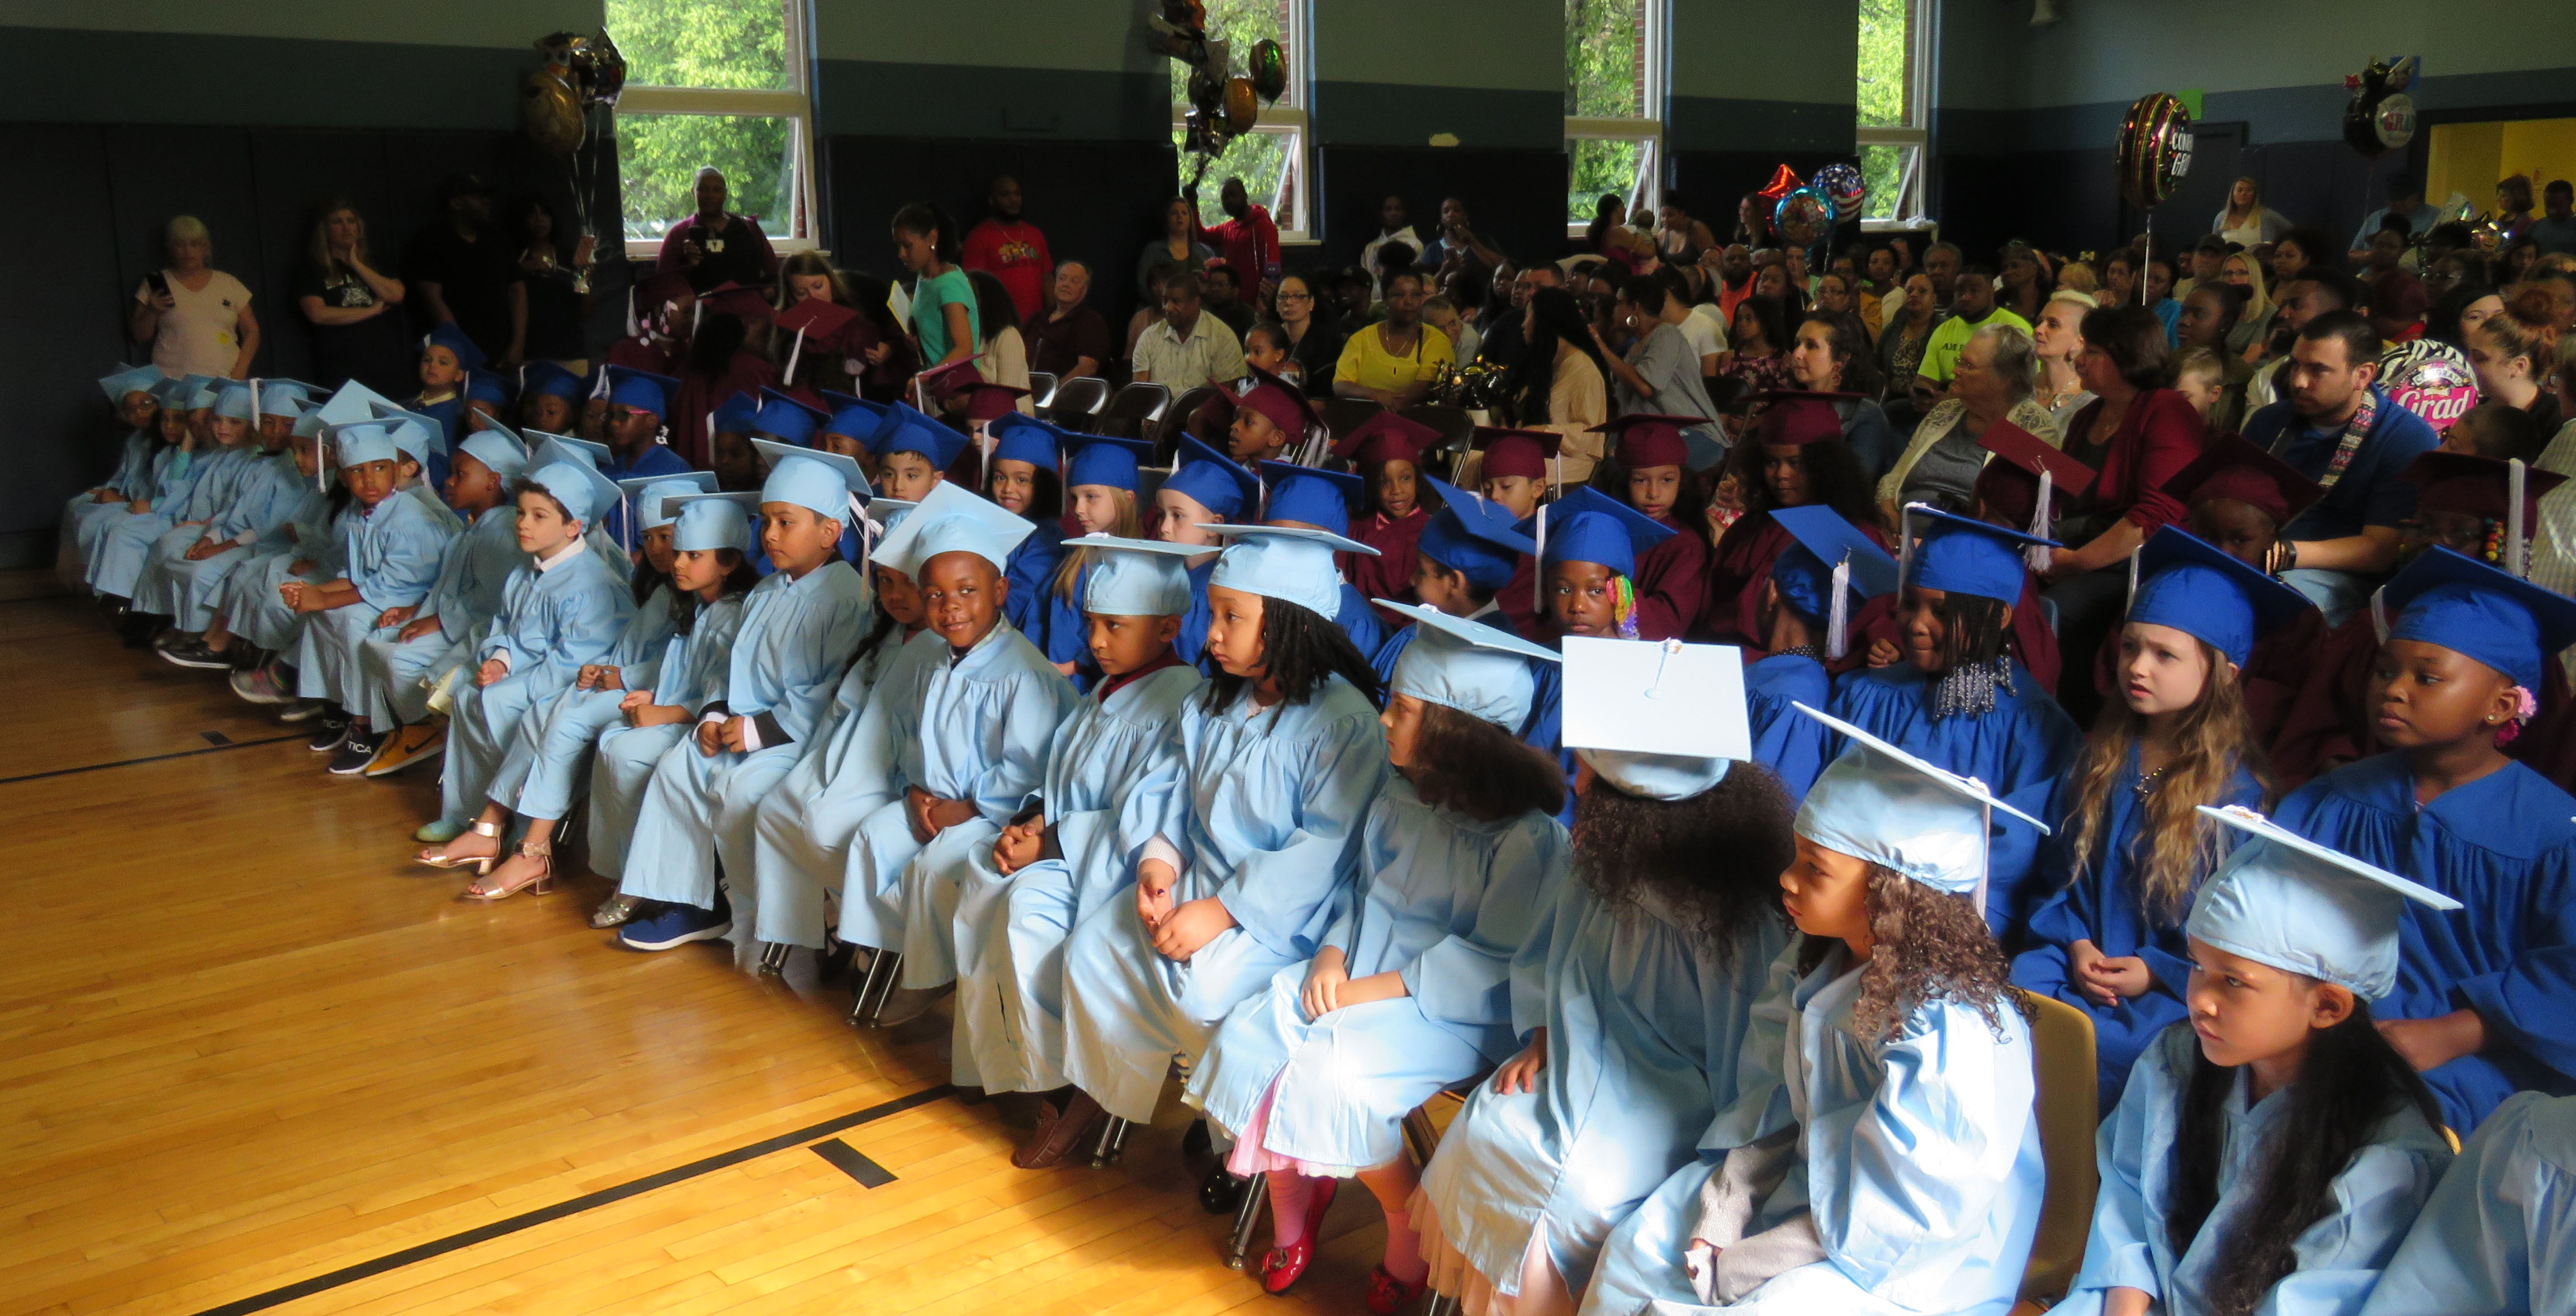 Congratulations to the Class of 2031, as we celebrate the first of many milestone moments at your Kindergarten Graduation